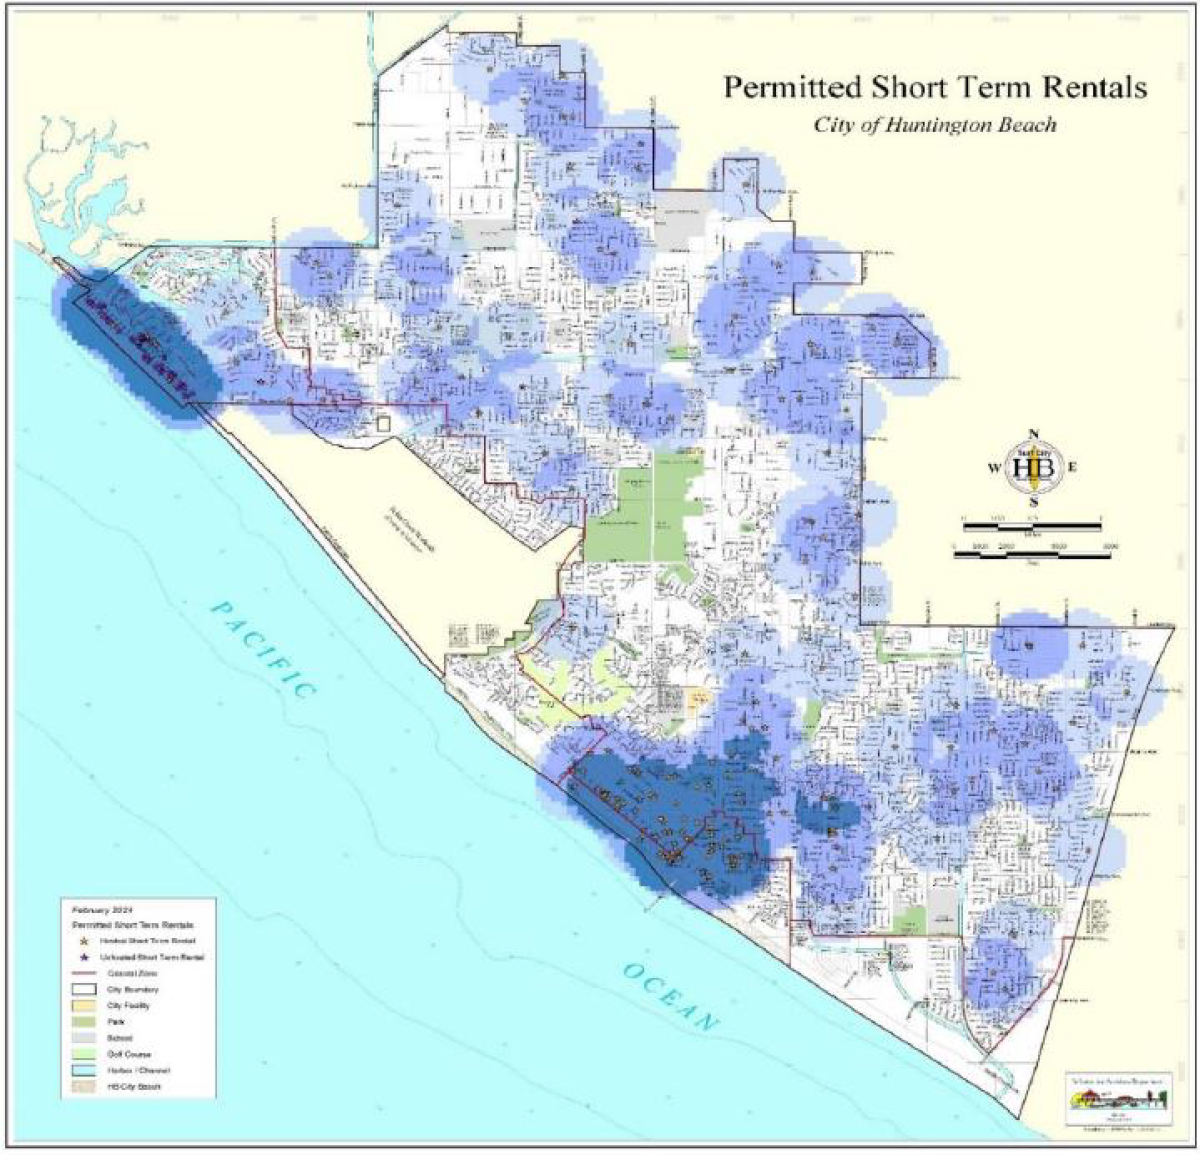 A map of permitted short-term rentals in the city of Huntington Beach.